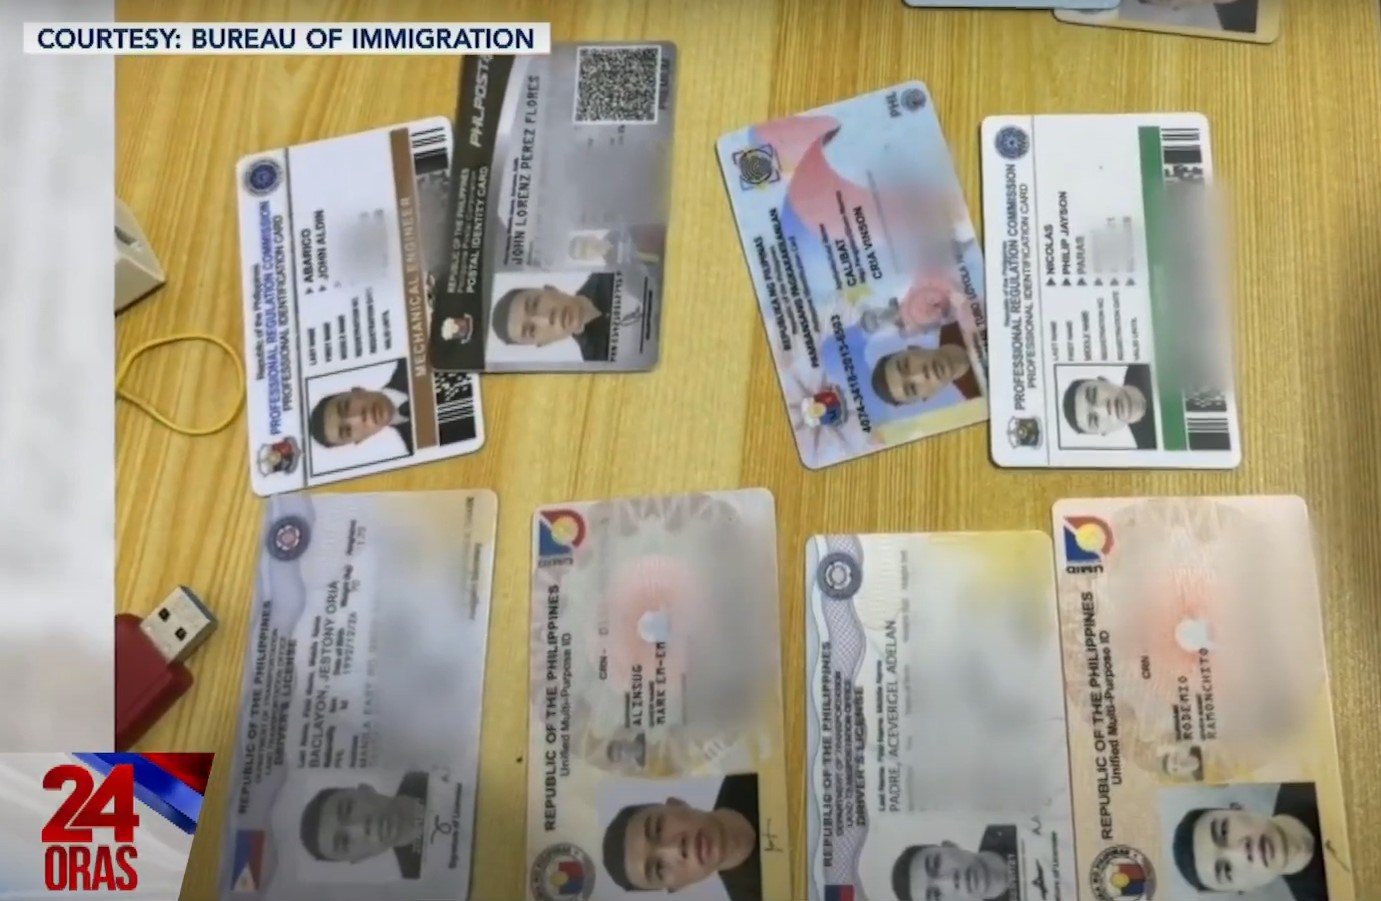 Suspect yields gov’t-issued IDs, including licenses as nurse, chemical engineer